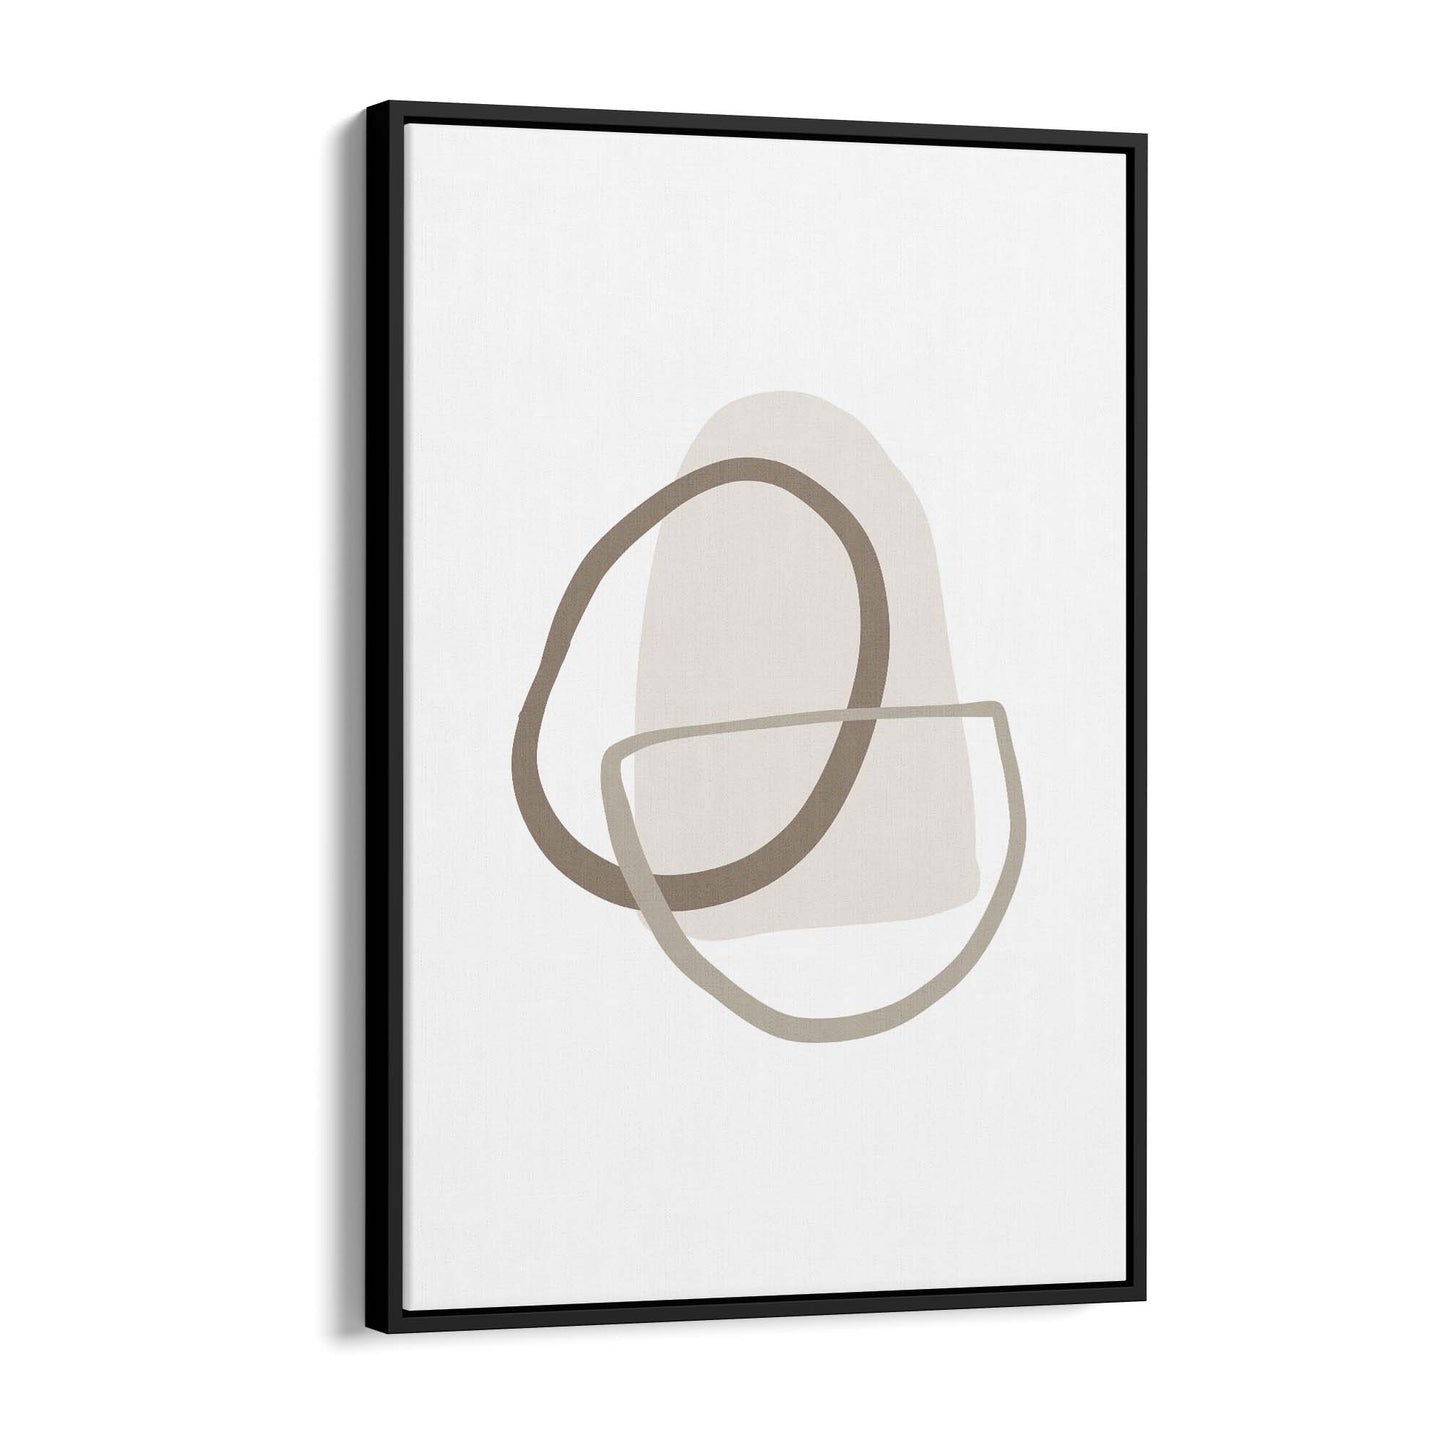 Minimal Black & White Shapes Abstract Wall Art #10 - The Affordable Art Company